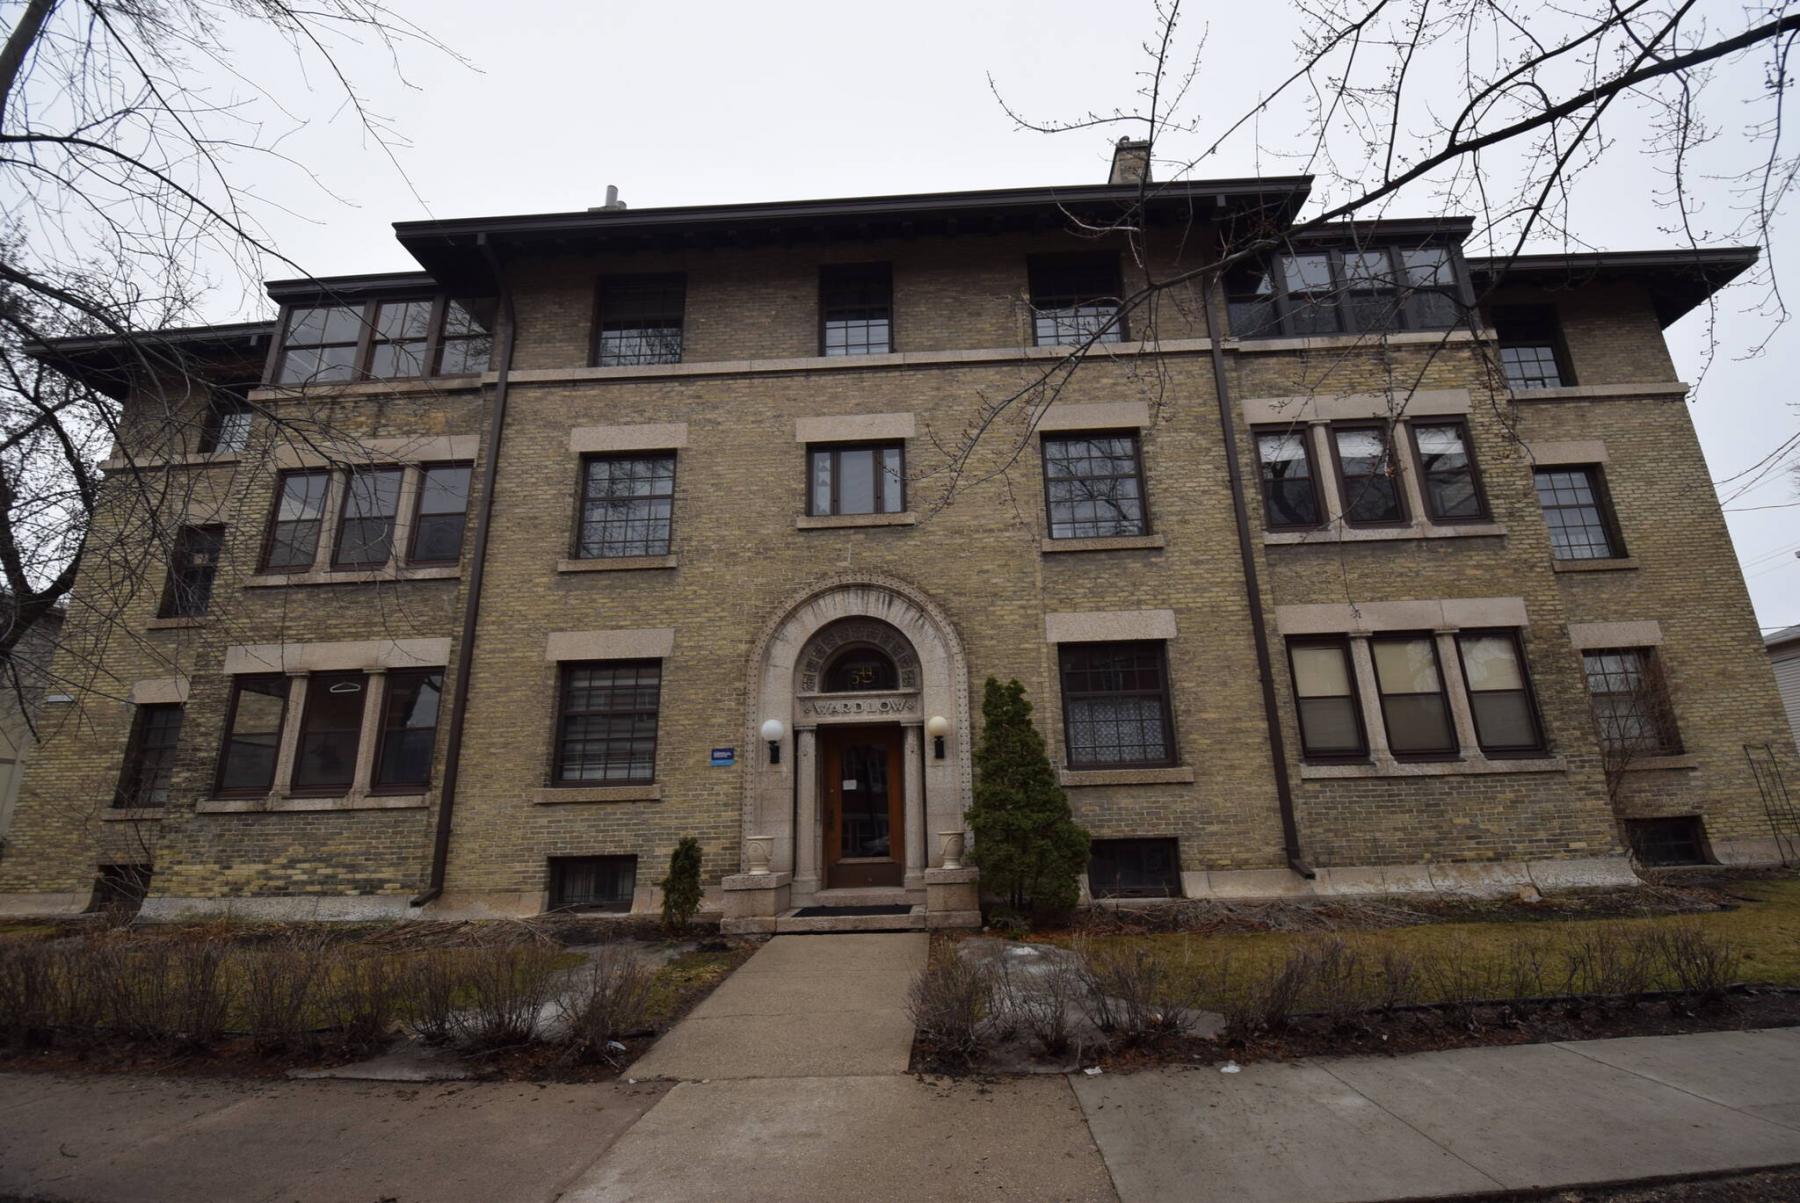 <p>Photos by Todd Lewys / Winnipeg Free Press</p><p>Built in 1905, the Wardlow was one of Winnipeg&rsquo;s first luxury apartments, featuring a stately brick and stone exterior,six king-sized suites and ornate woodwork throughout.</p>